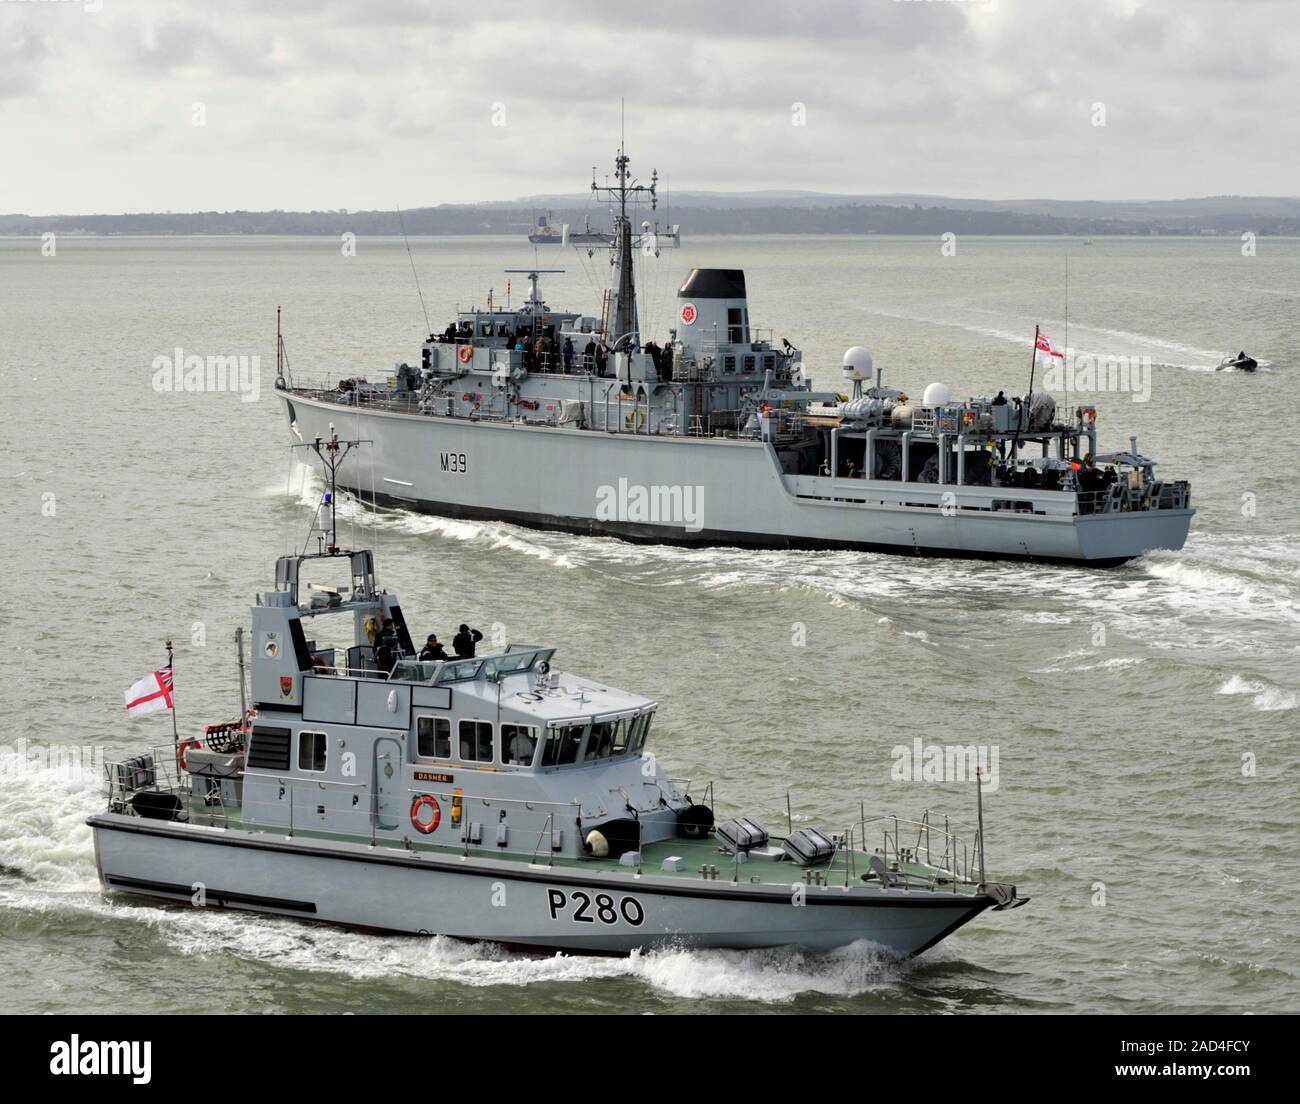 AJAXNETPHTO. 6TH MARCH, 2015. PORTSMOUTH, ENGLAND. - HMS HURWORTH (DISTANT) LEAVING HARBOUR PASSING HMS DASHER INWARD BOUND.PHOTO:TONY HOLLAND/AJAX REF;DTH150603 36935 Stock Photo